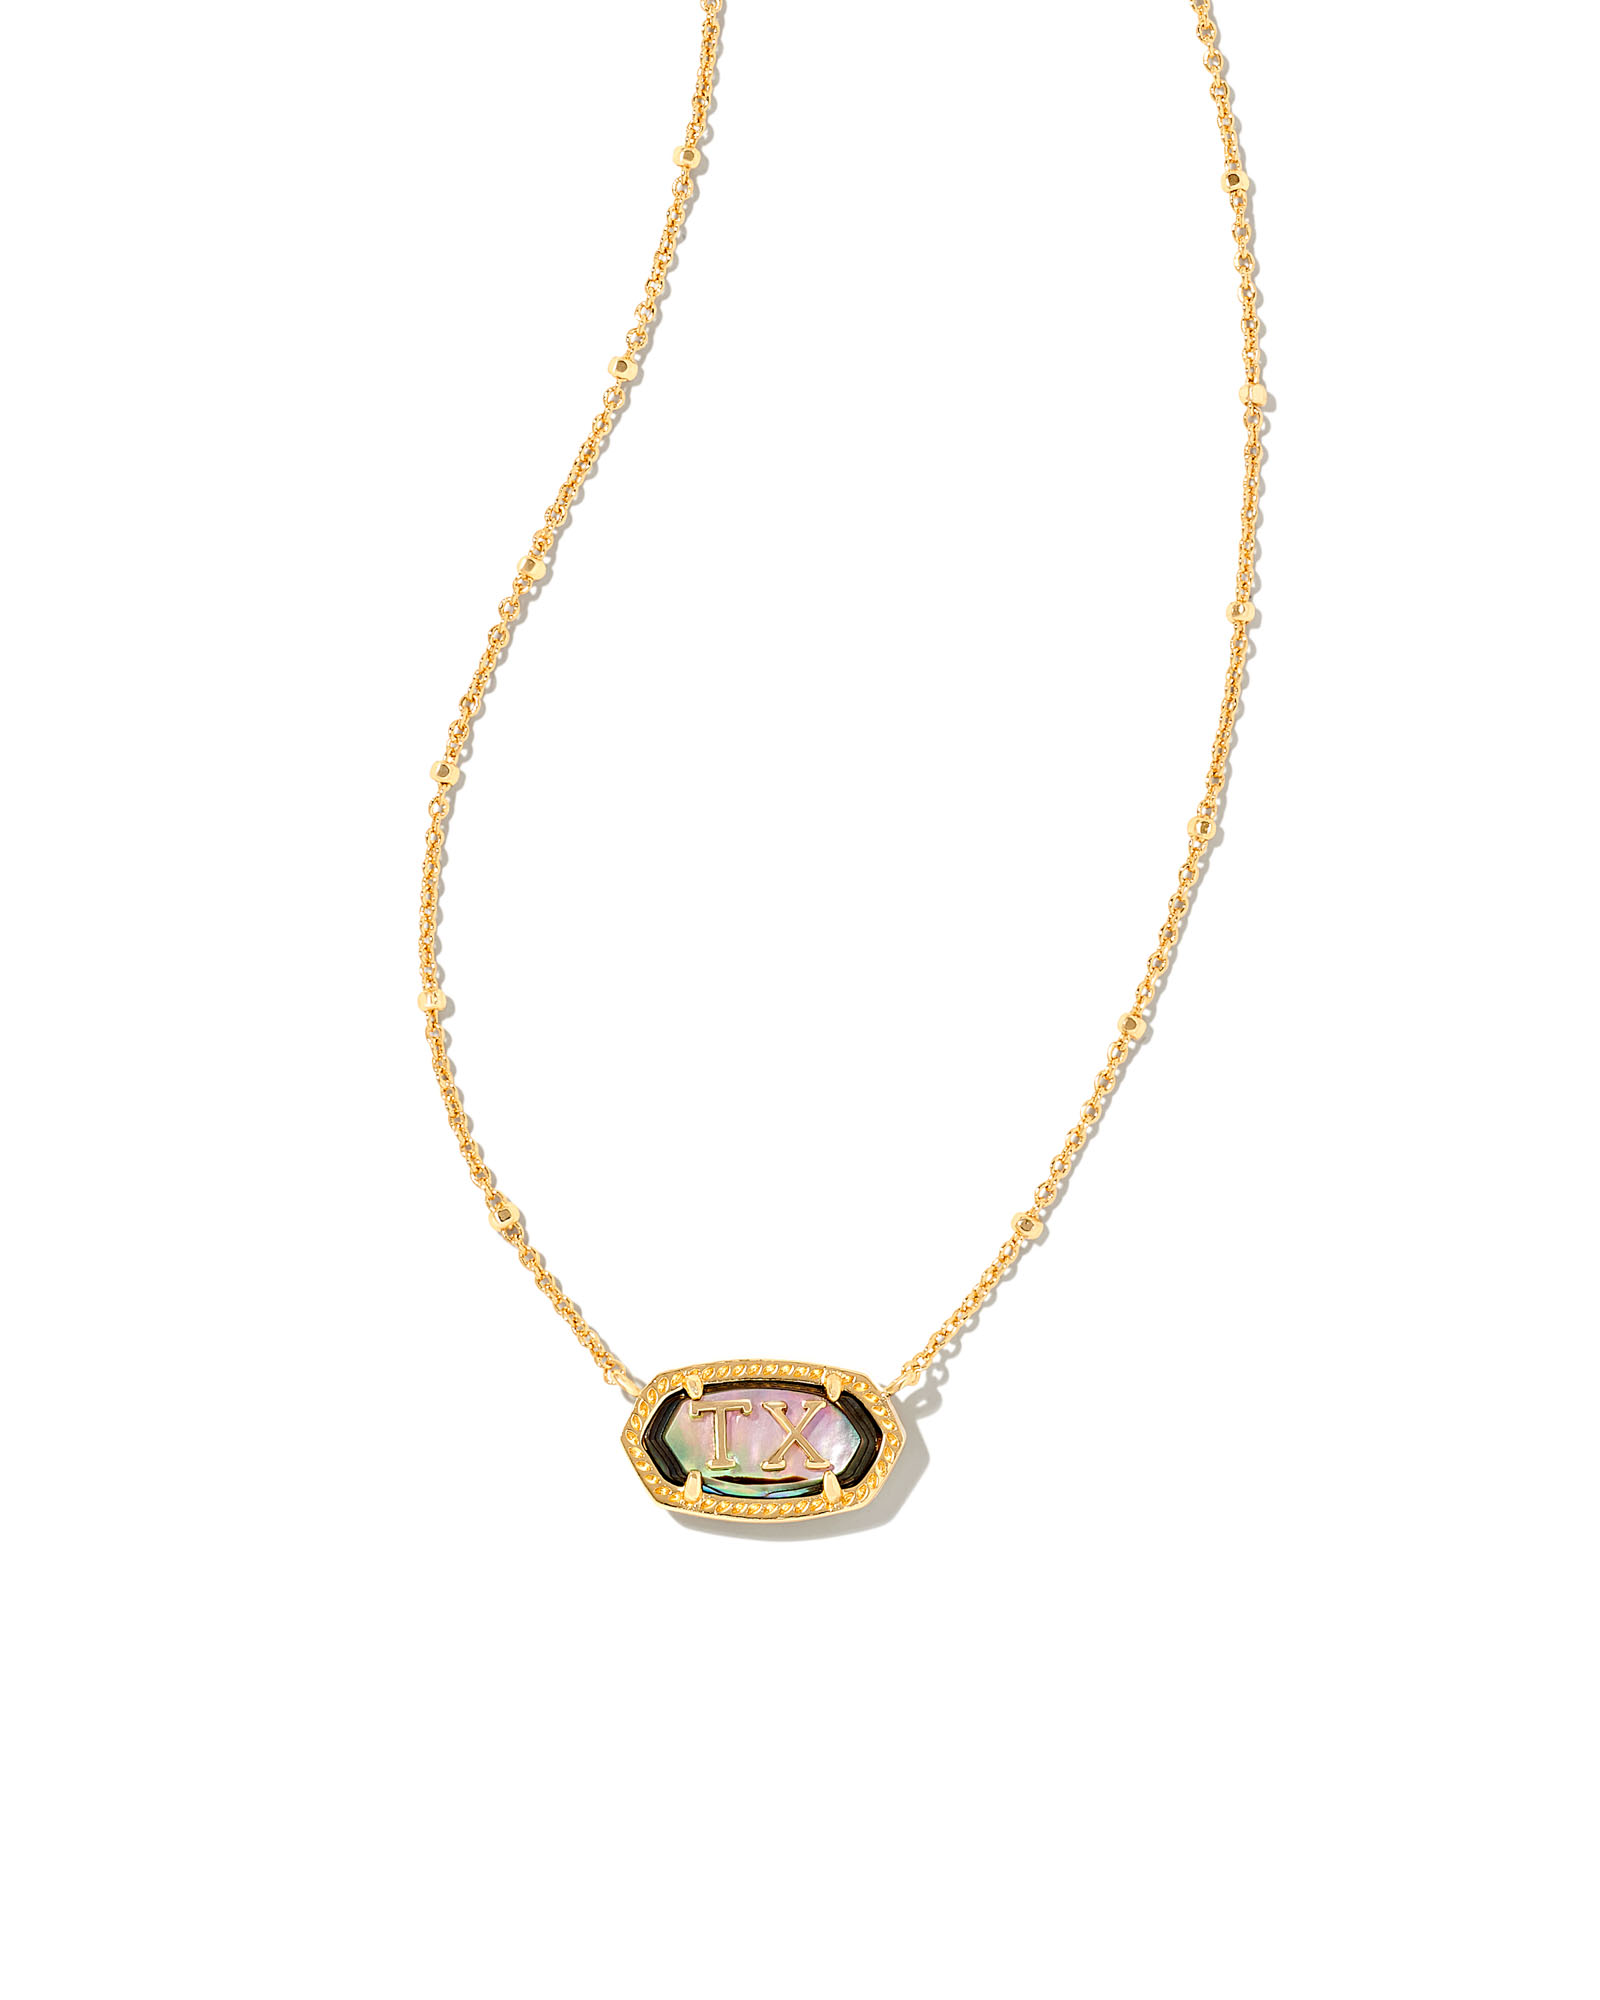 Dira Gold Coin Charm Necklace in Lilac Abalone | Kendra Scott